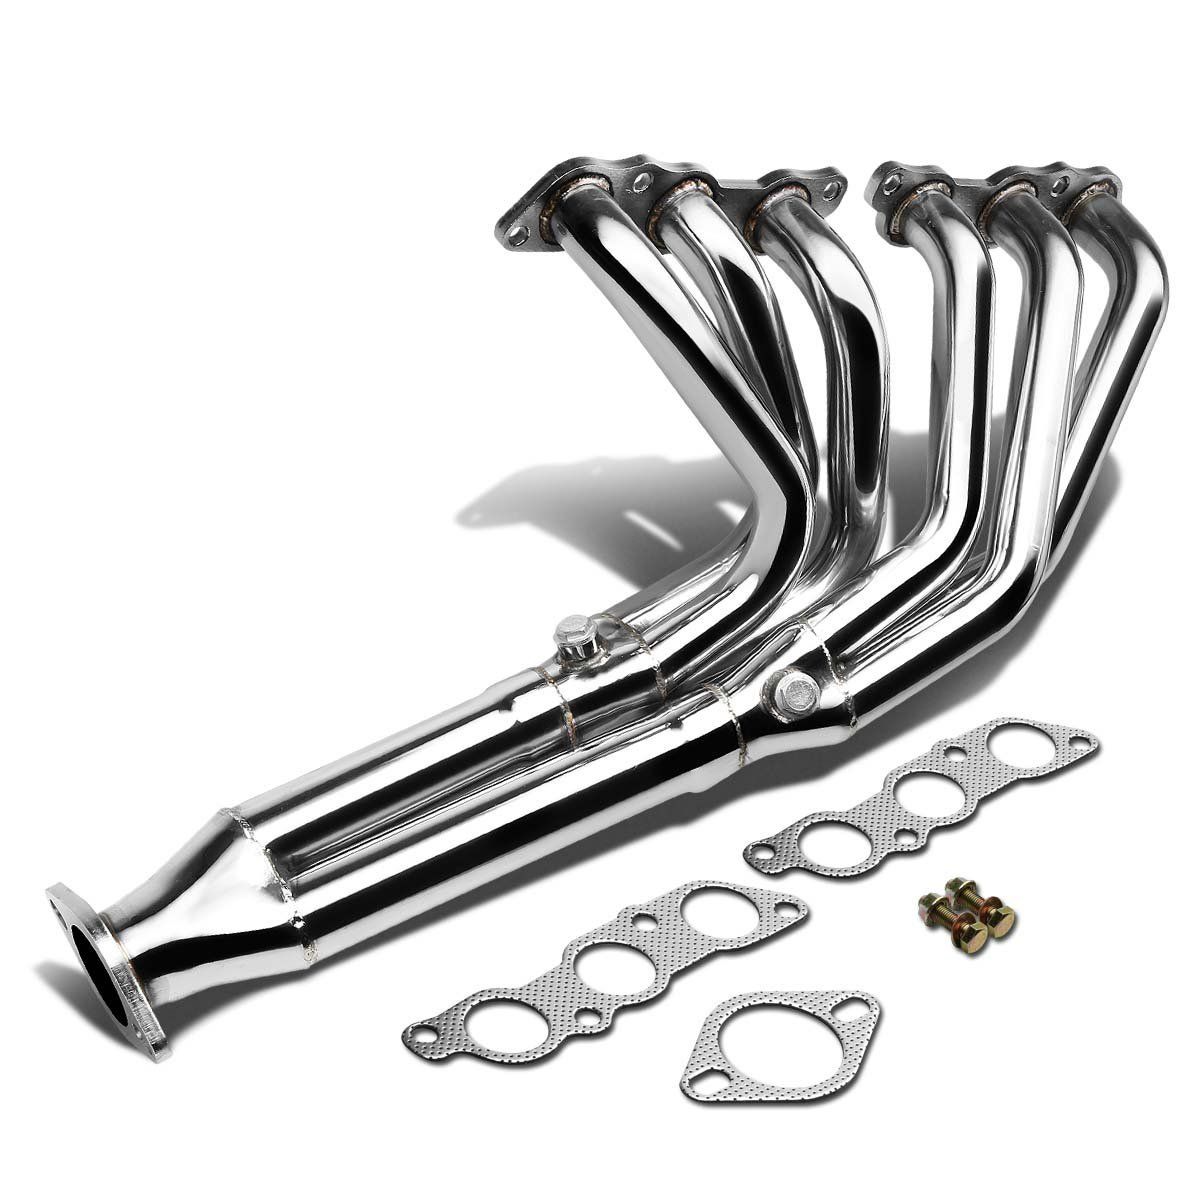 ODM An Fittings Blue Manufacturer –  Stainless Racing Header Manifold Exhaust header Fits For 93-98 Toyota Supra MK4 NA 3.0L – Yibai